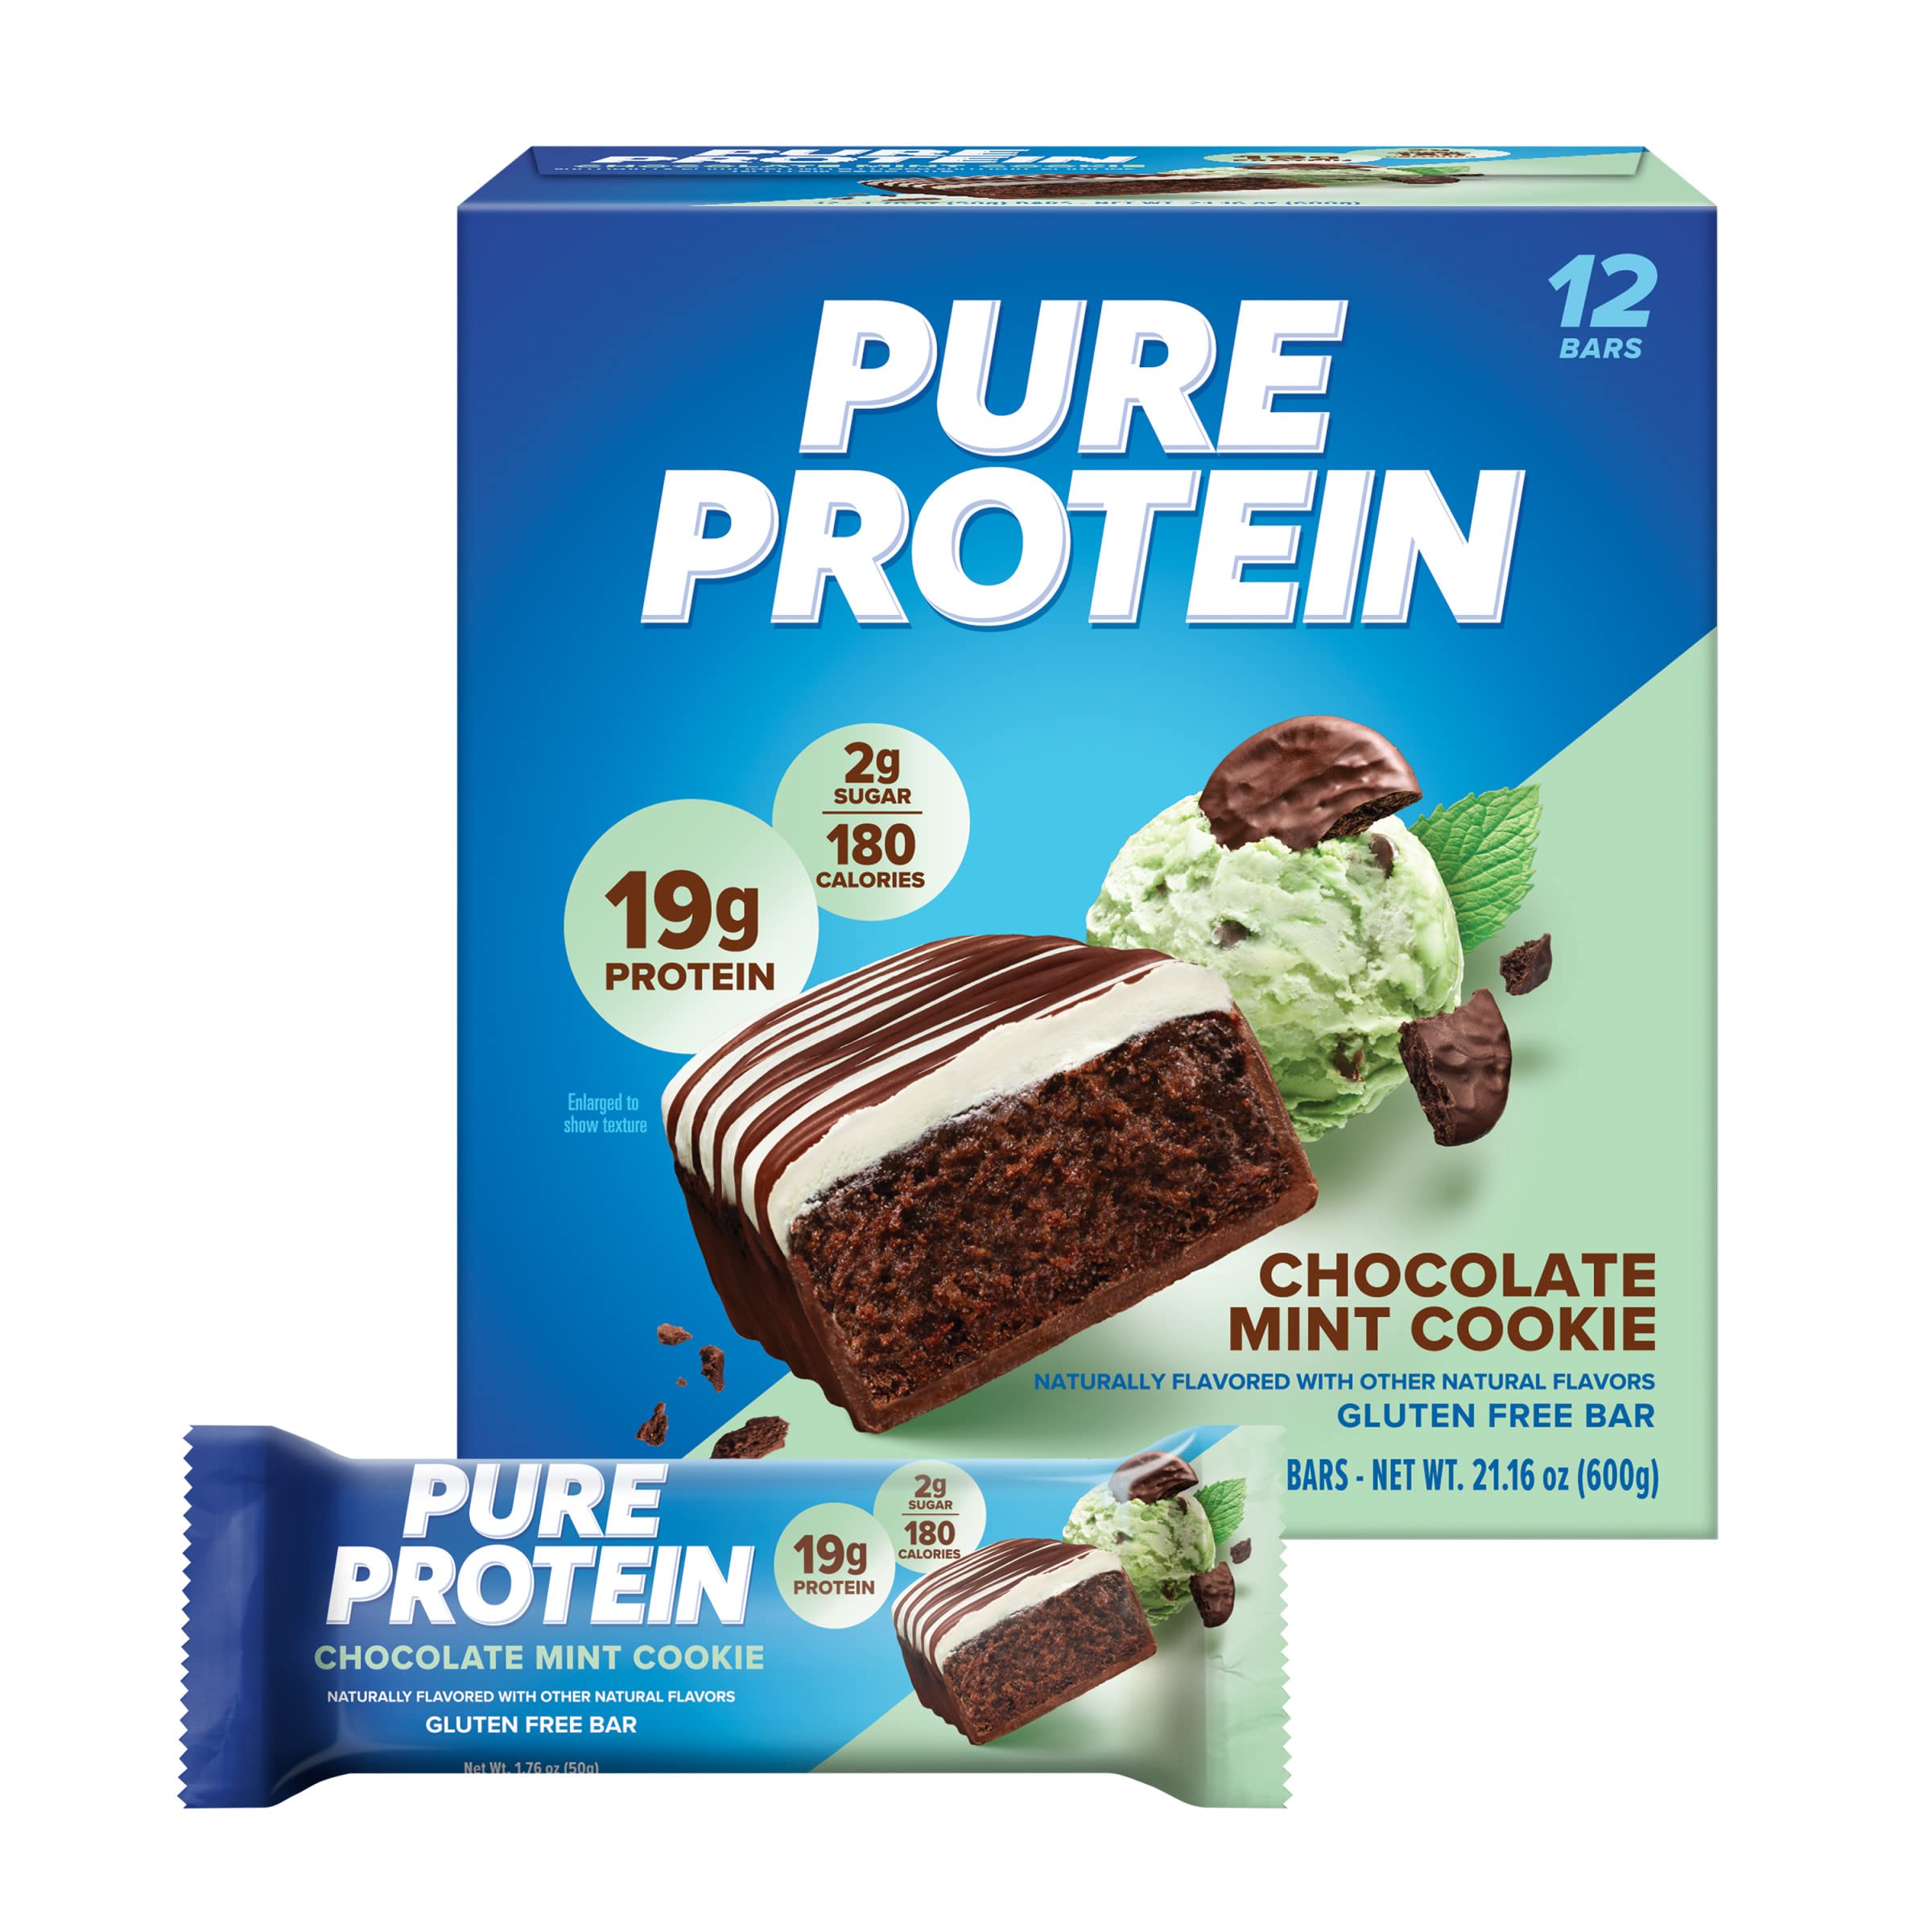 Pure Protein Bars, High Protein, Nutritious Snacks to Support Energy, Low Sugar, Gluten free, Chocolate Mint Cookie,1.76oz, 12 Count (Packaging May Vary)